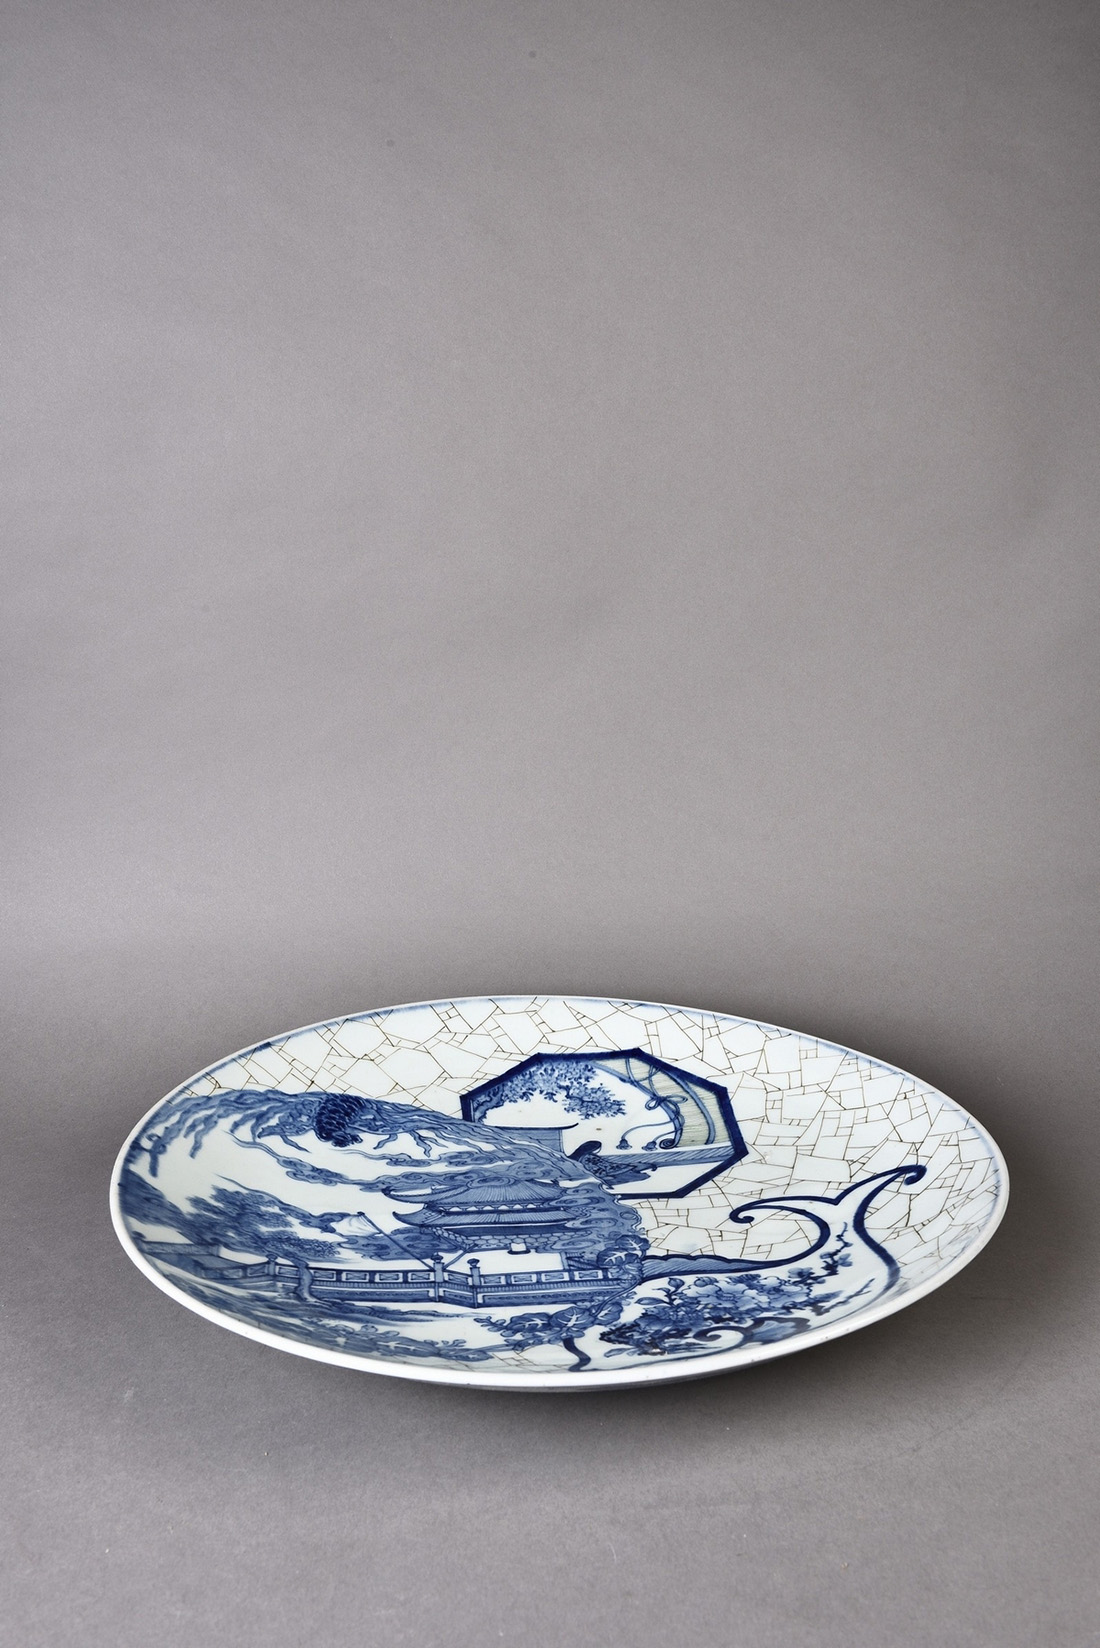 A Chinese export blue and white porcelain charger depicting ancient pagoda in a landscape scenery. - Image 2 of 3